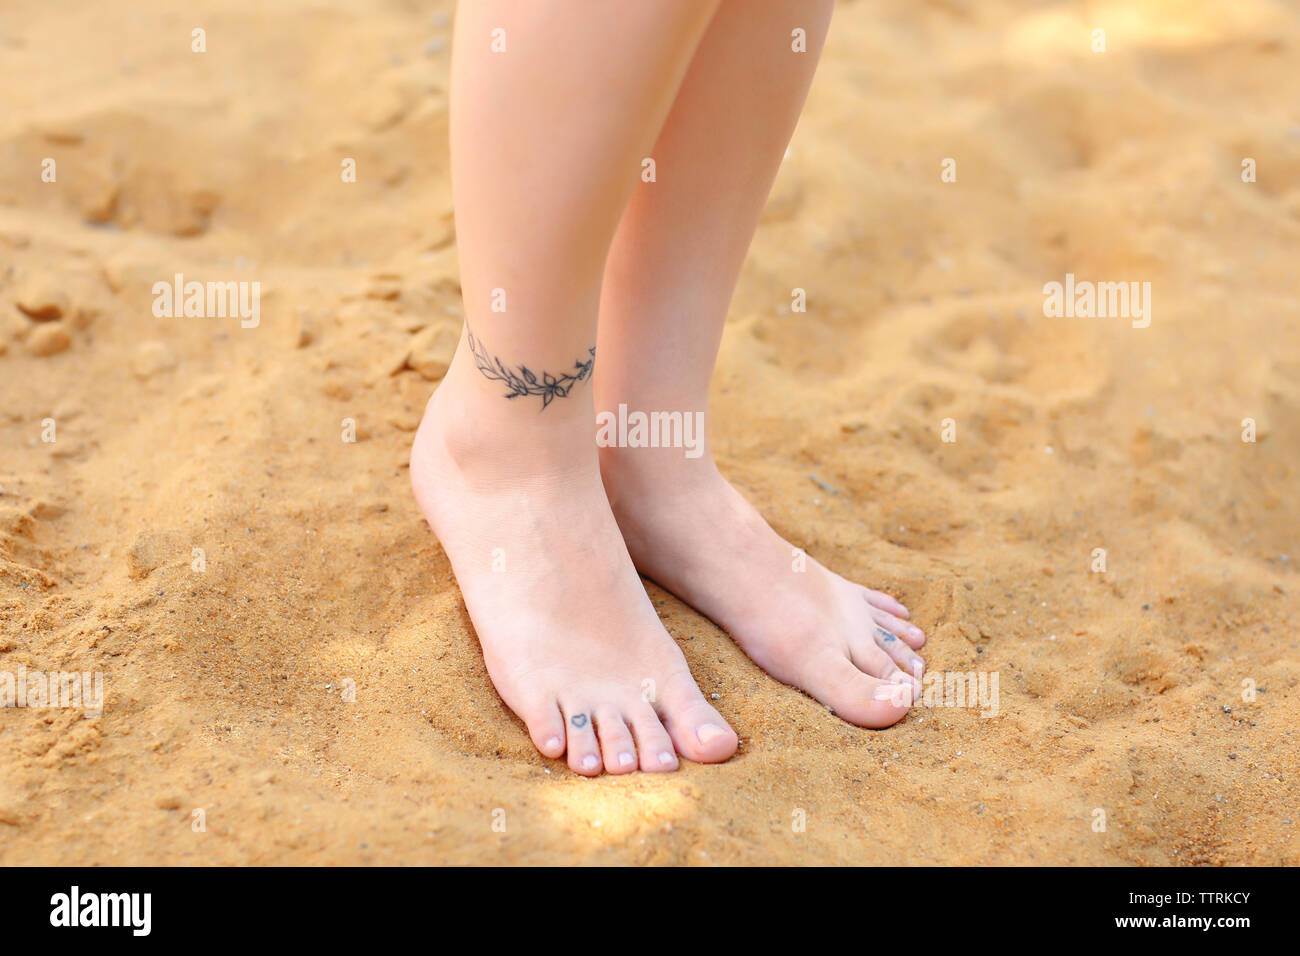 Female legs with tattoos on sand Stock Photo - Alamy